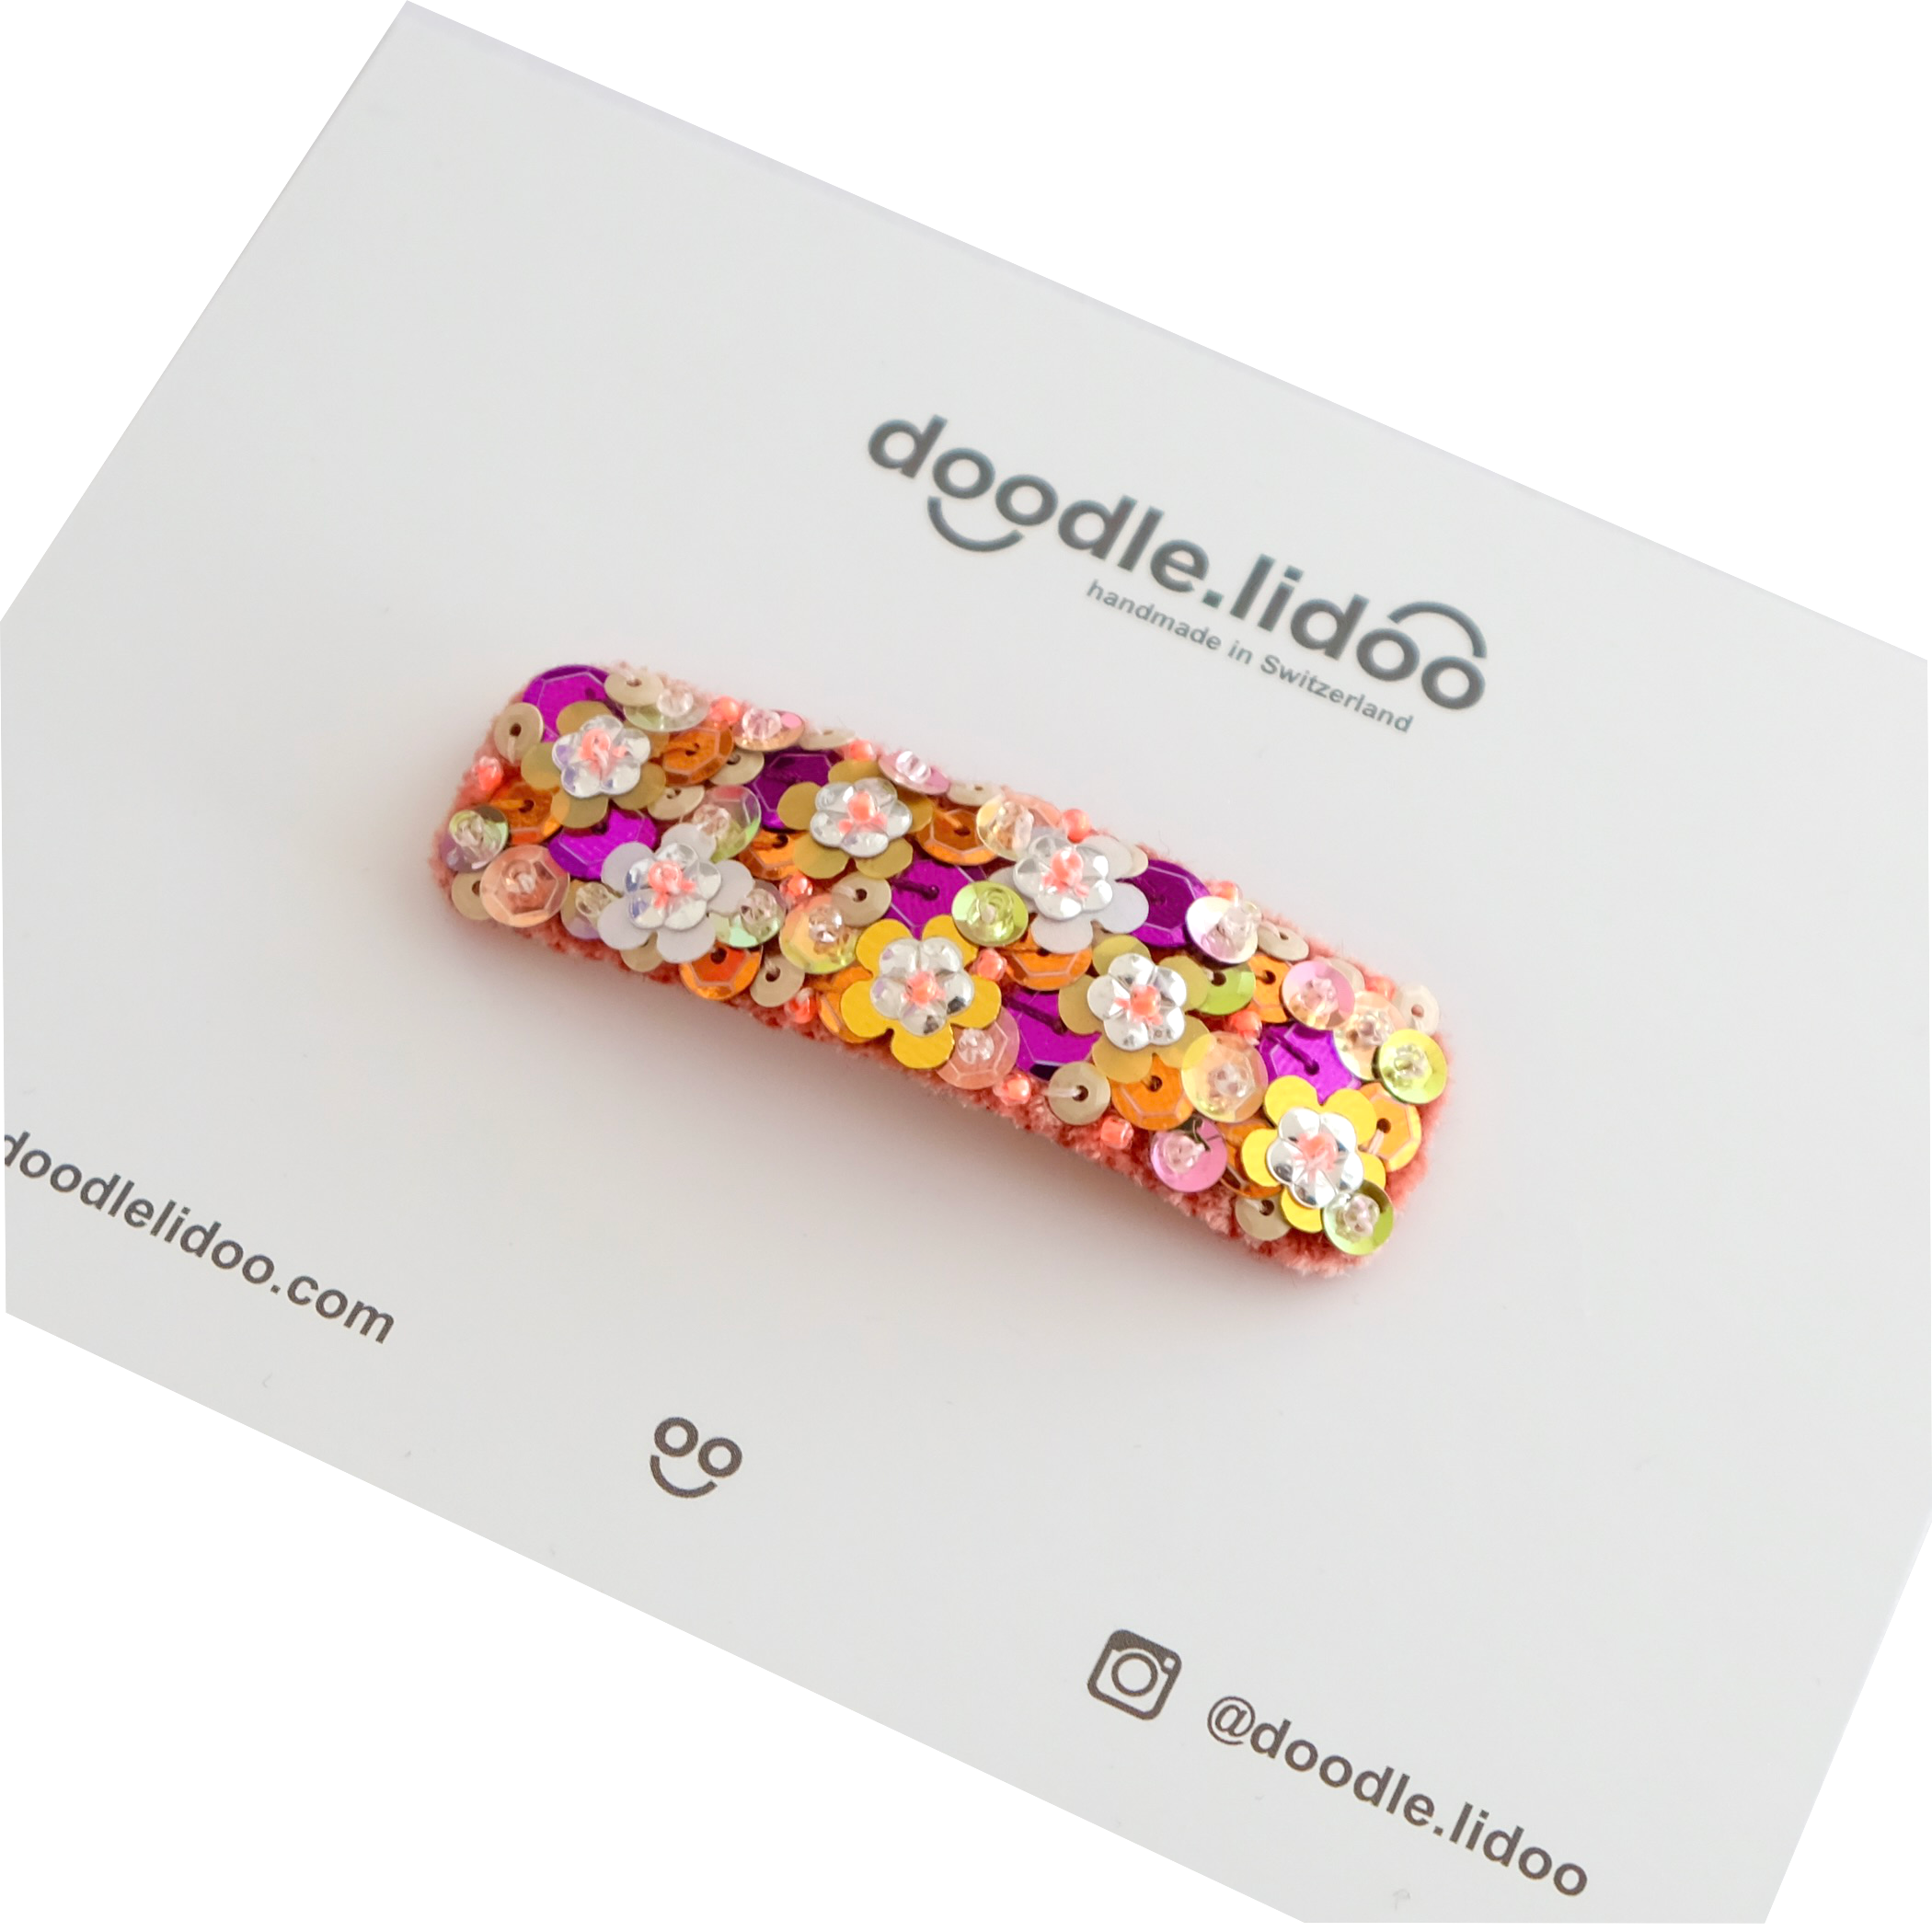 Ginger hair clip in rectangular shape made from silk velvet and embellished with sequins.